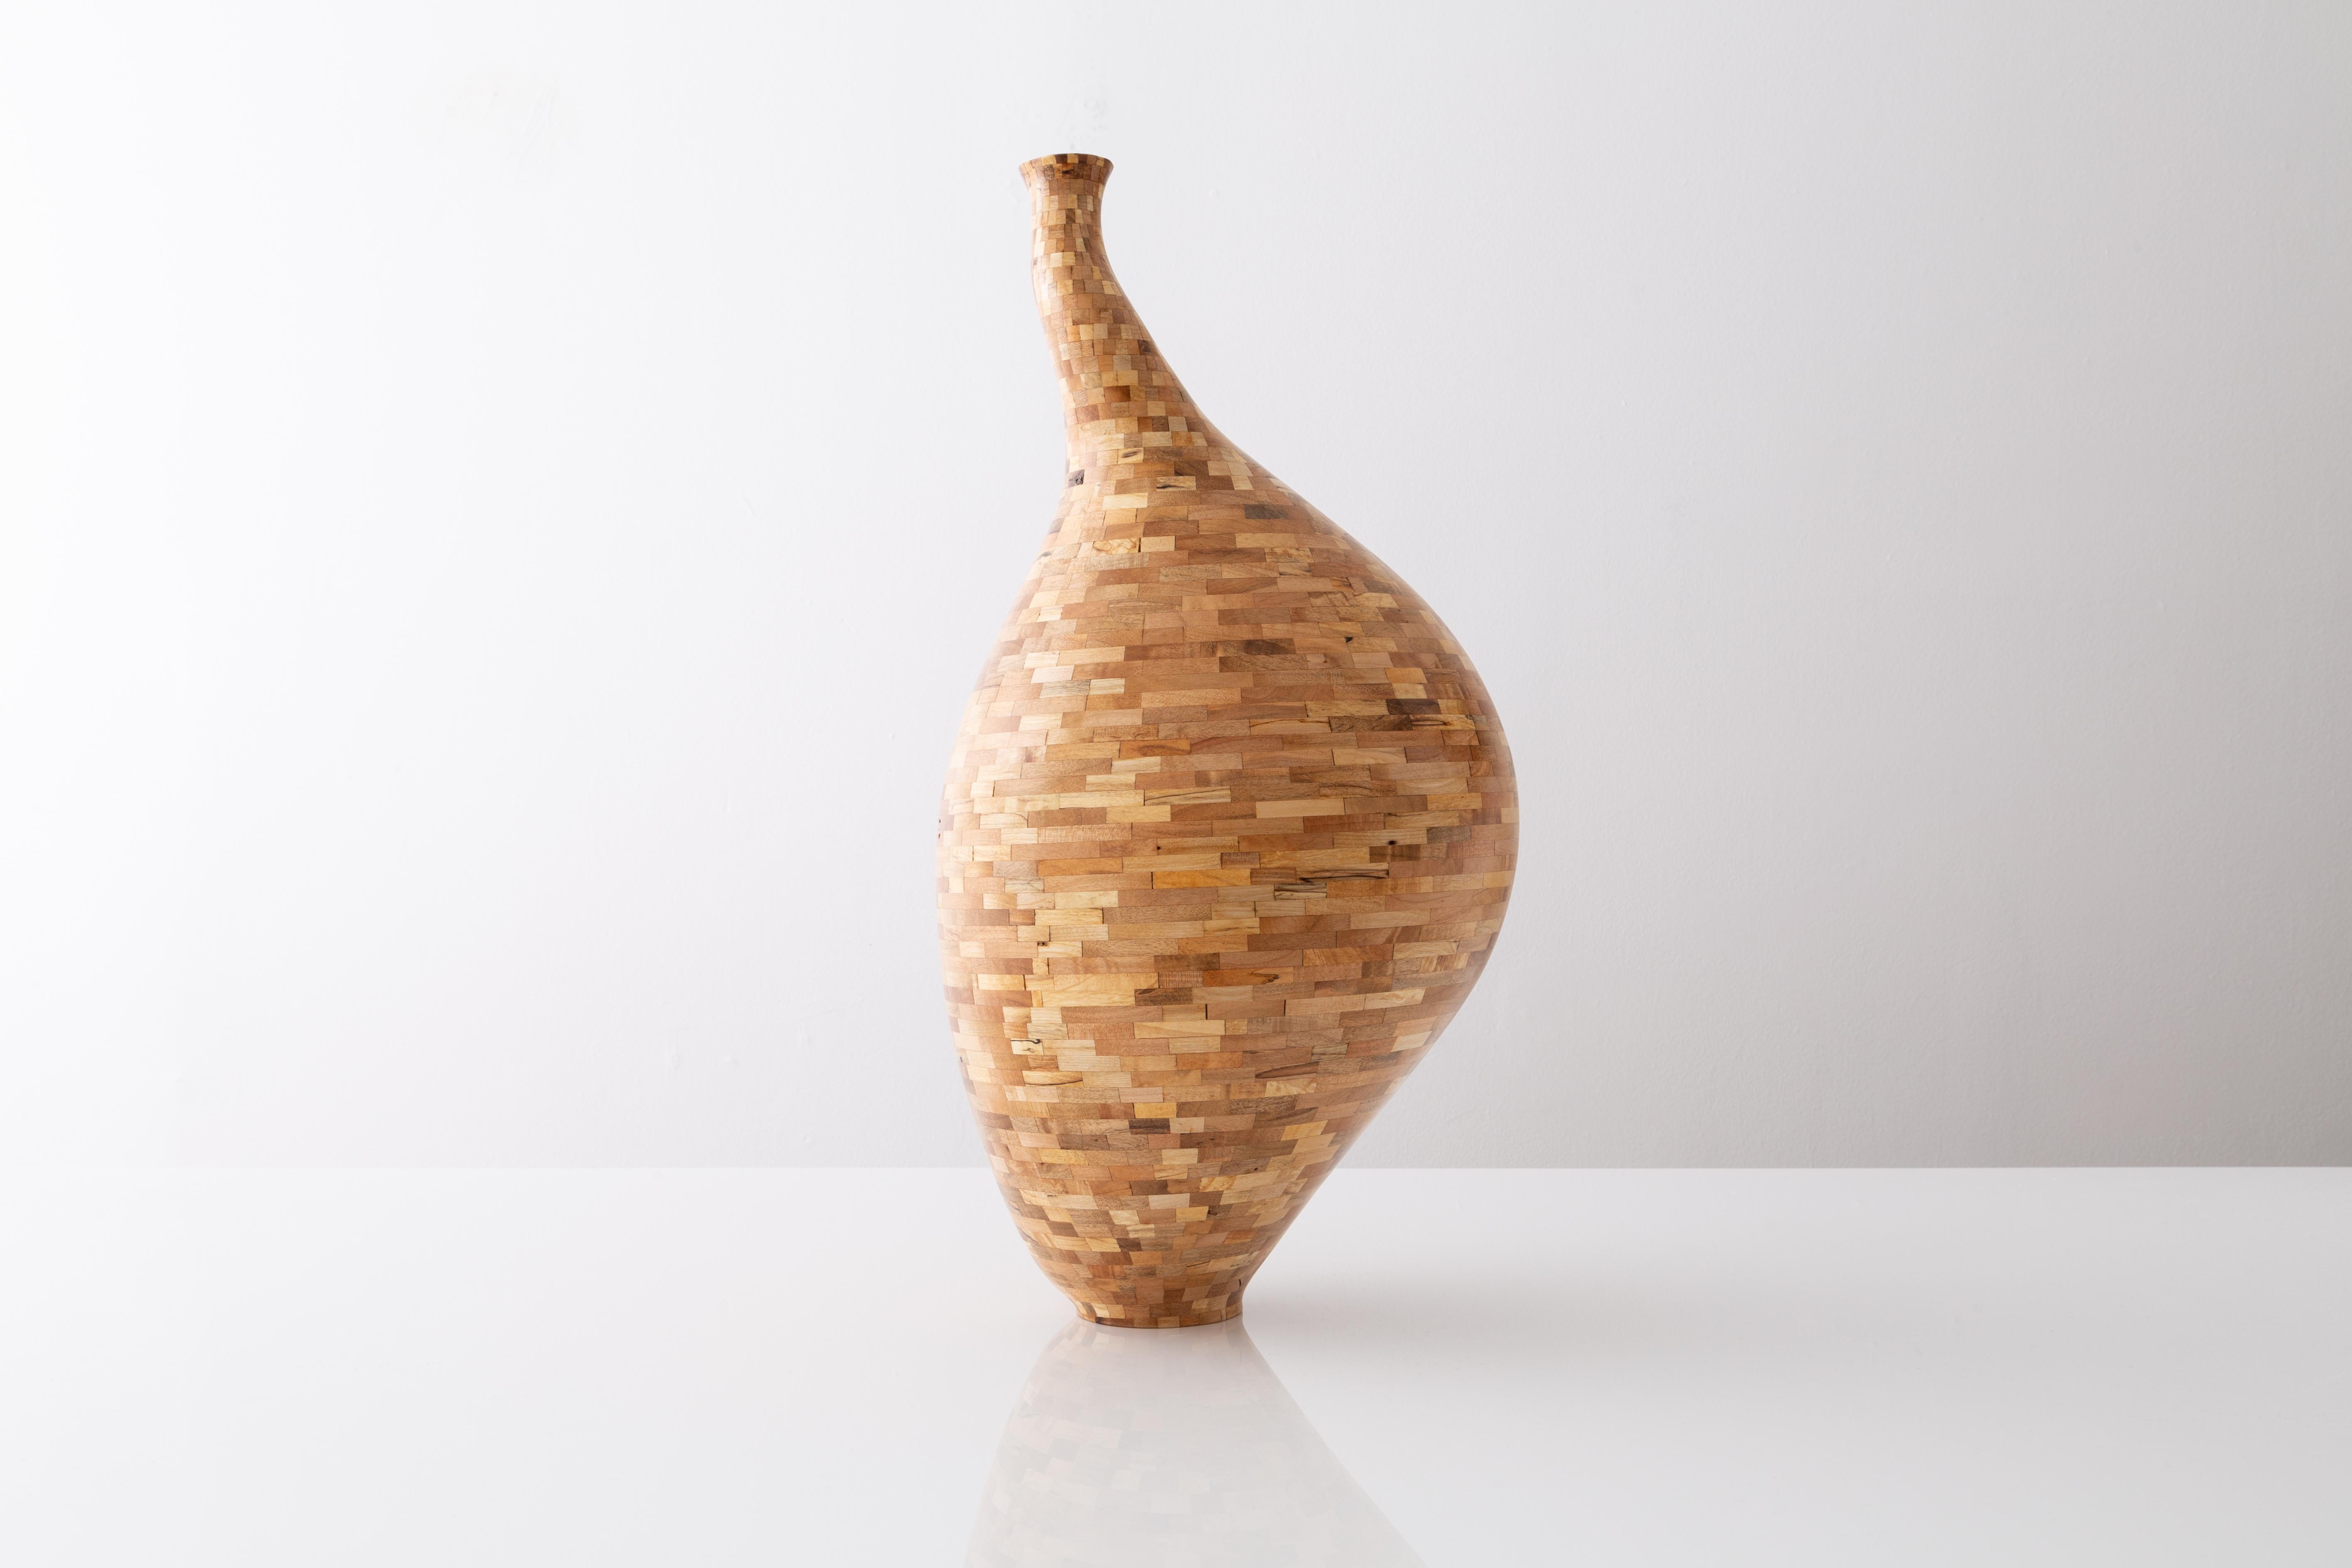 Contemporary Spalted Maple Goose Neck Vase #1 by Richard Haining, Available Now (amerikanisch)